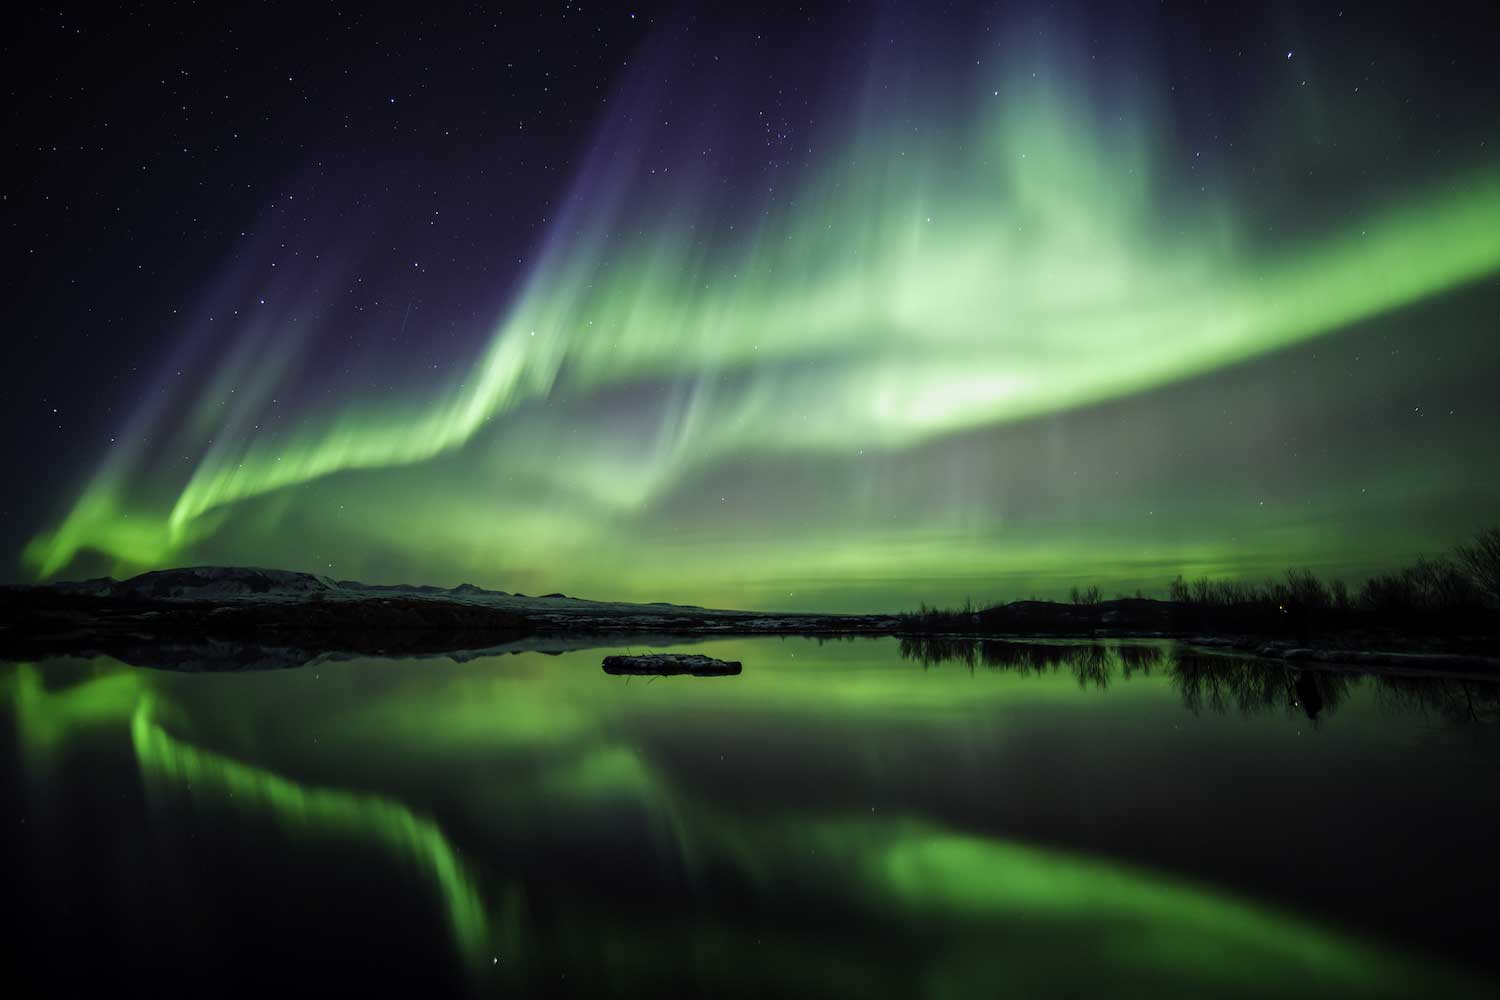 Northern Lights most prevalent in coming weeks - Aurora Borealis